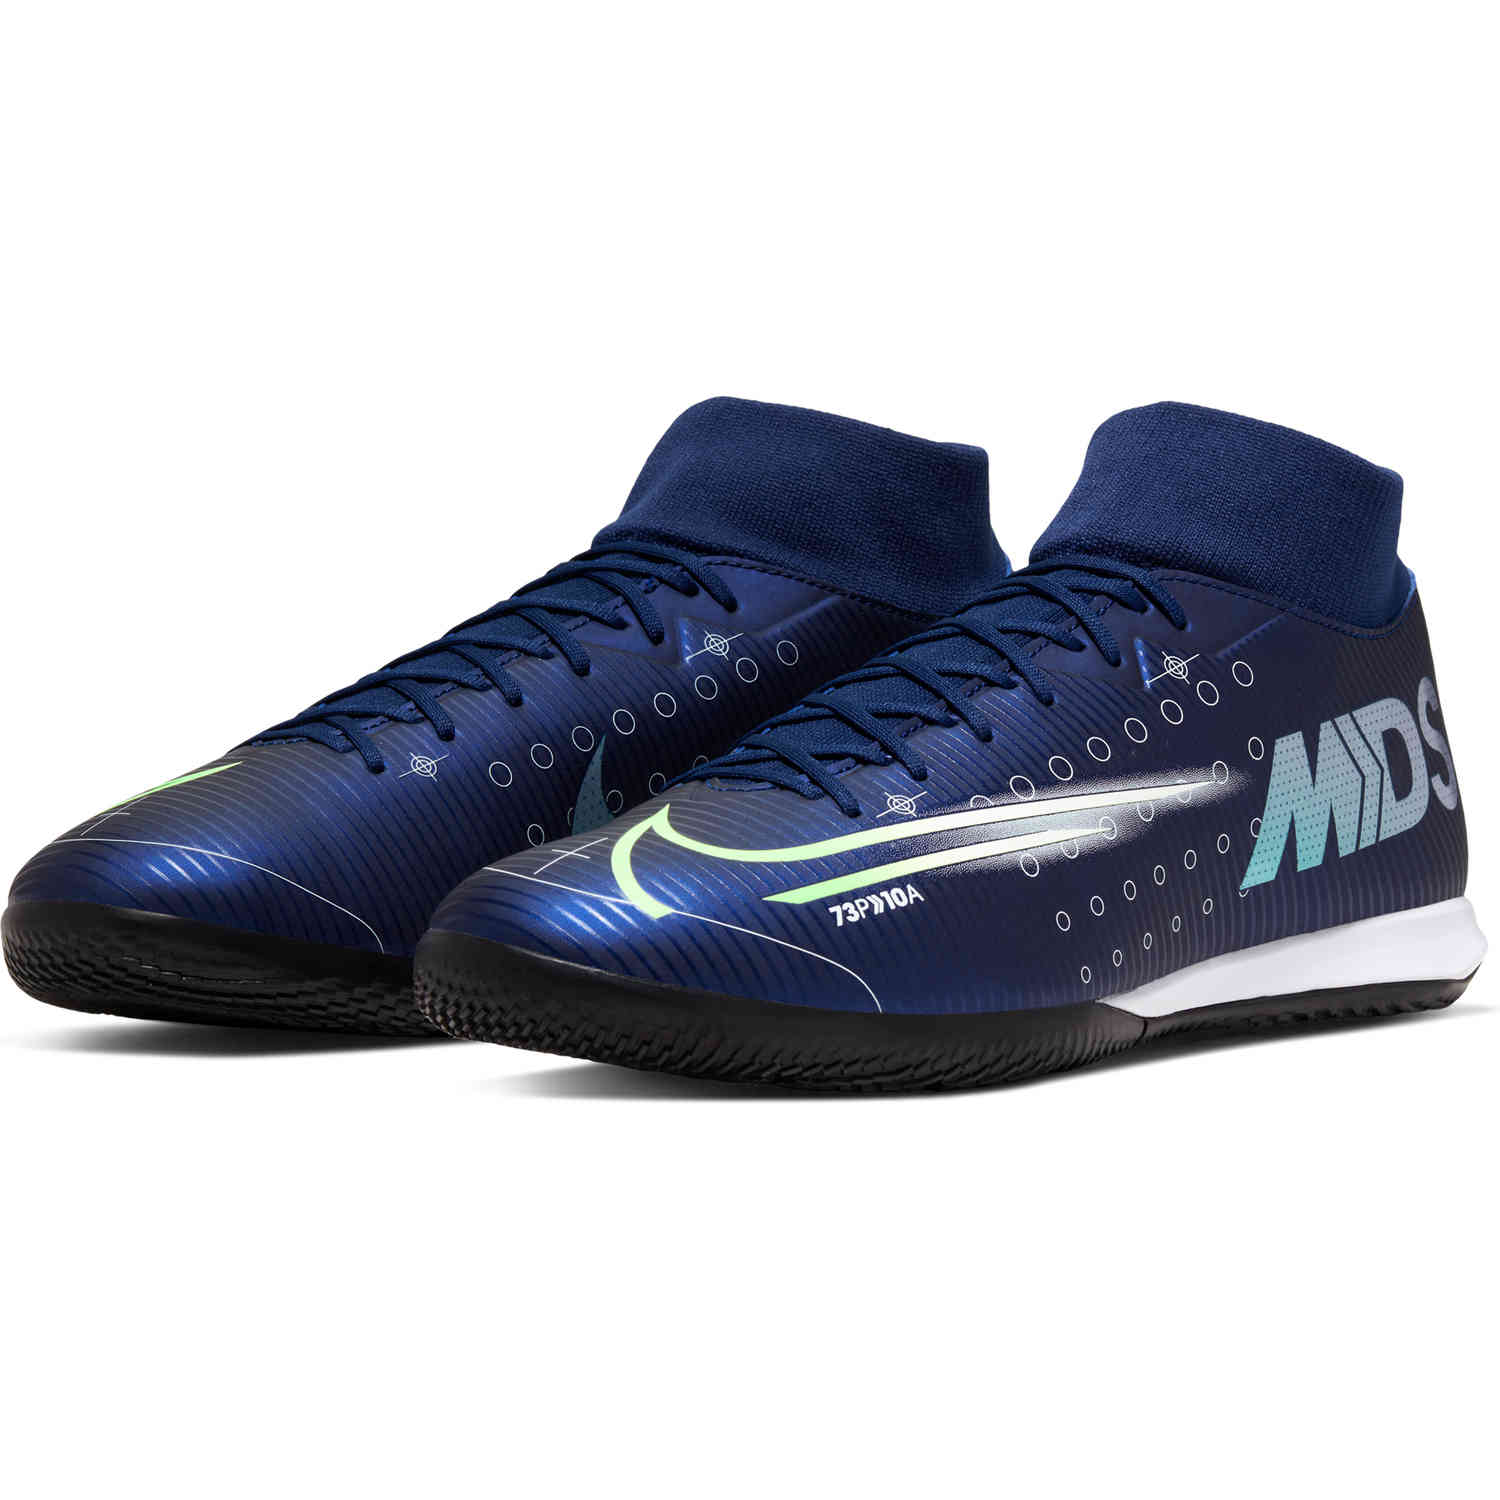 L'ultimo Top Selling Nuovo Nike Mercurial Superfly 5 FG